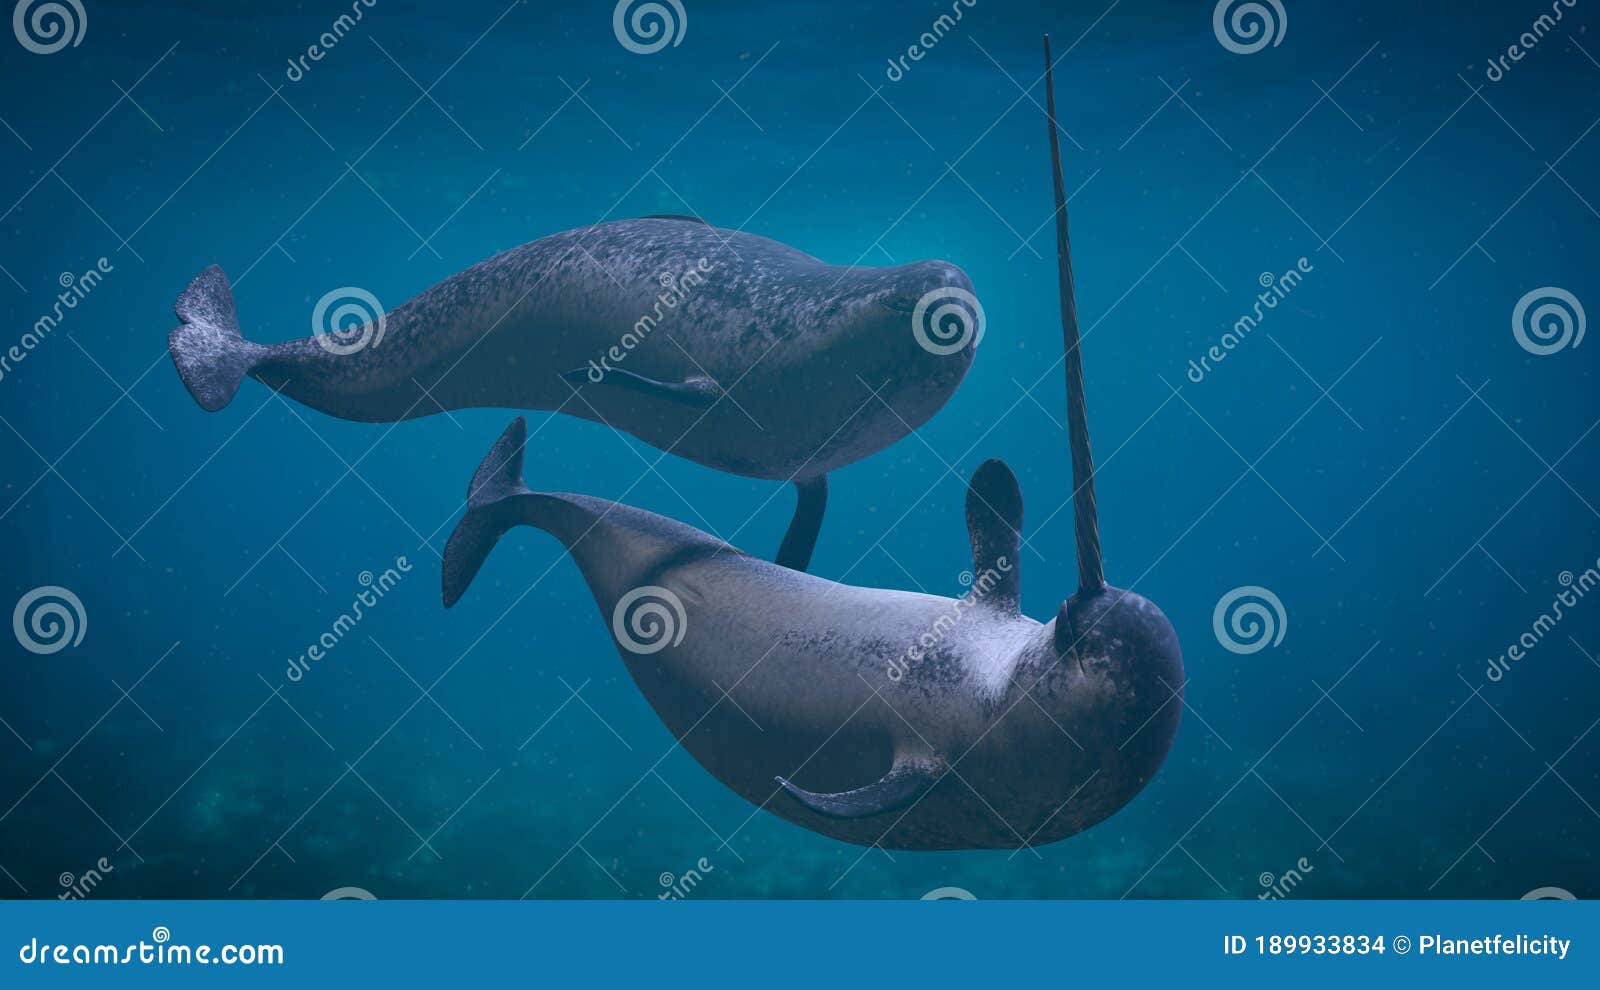 narwhal couple,  two monodon monoceros playing in the ocean